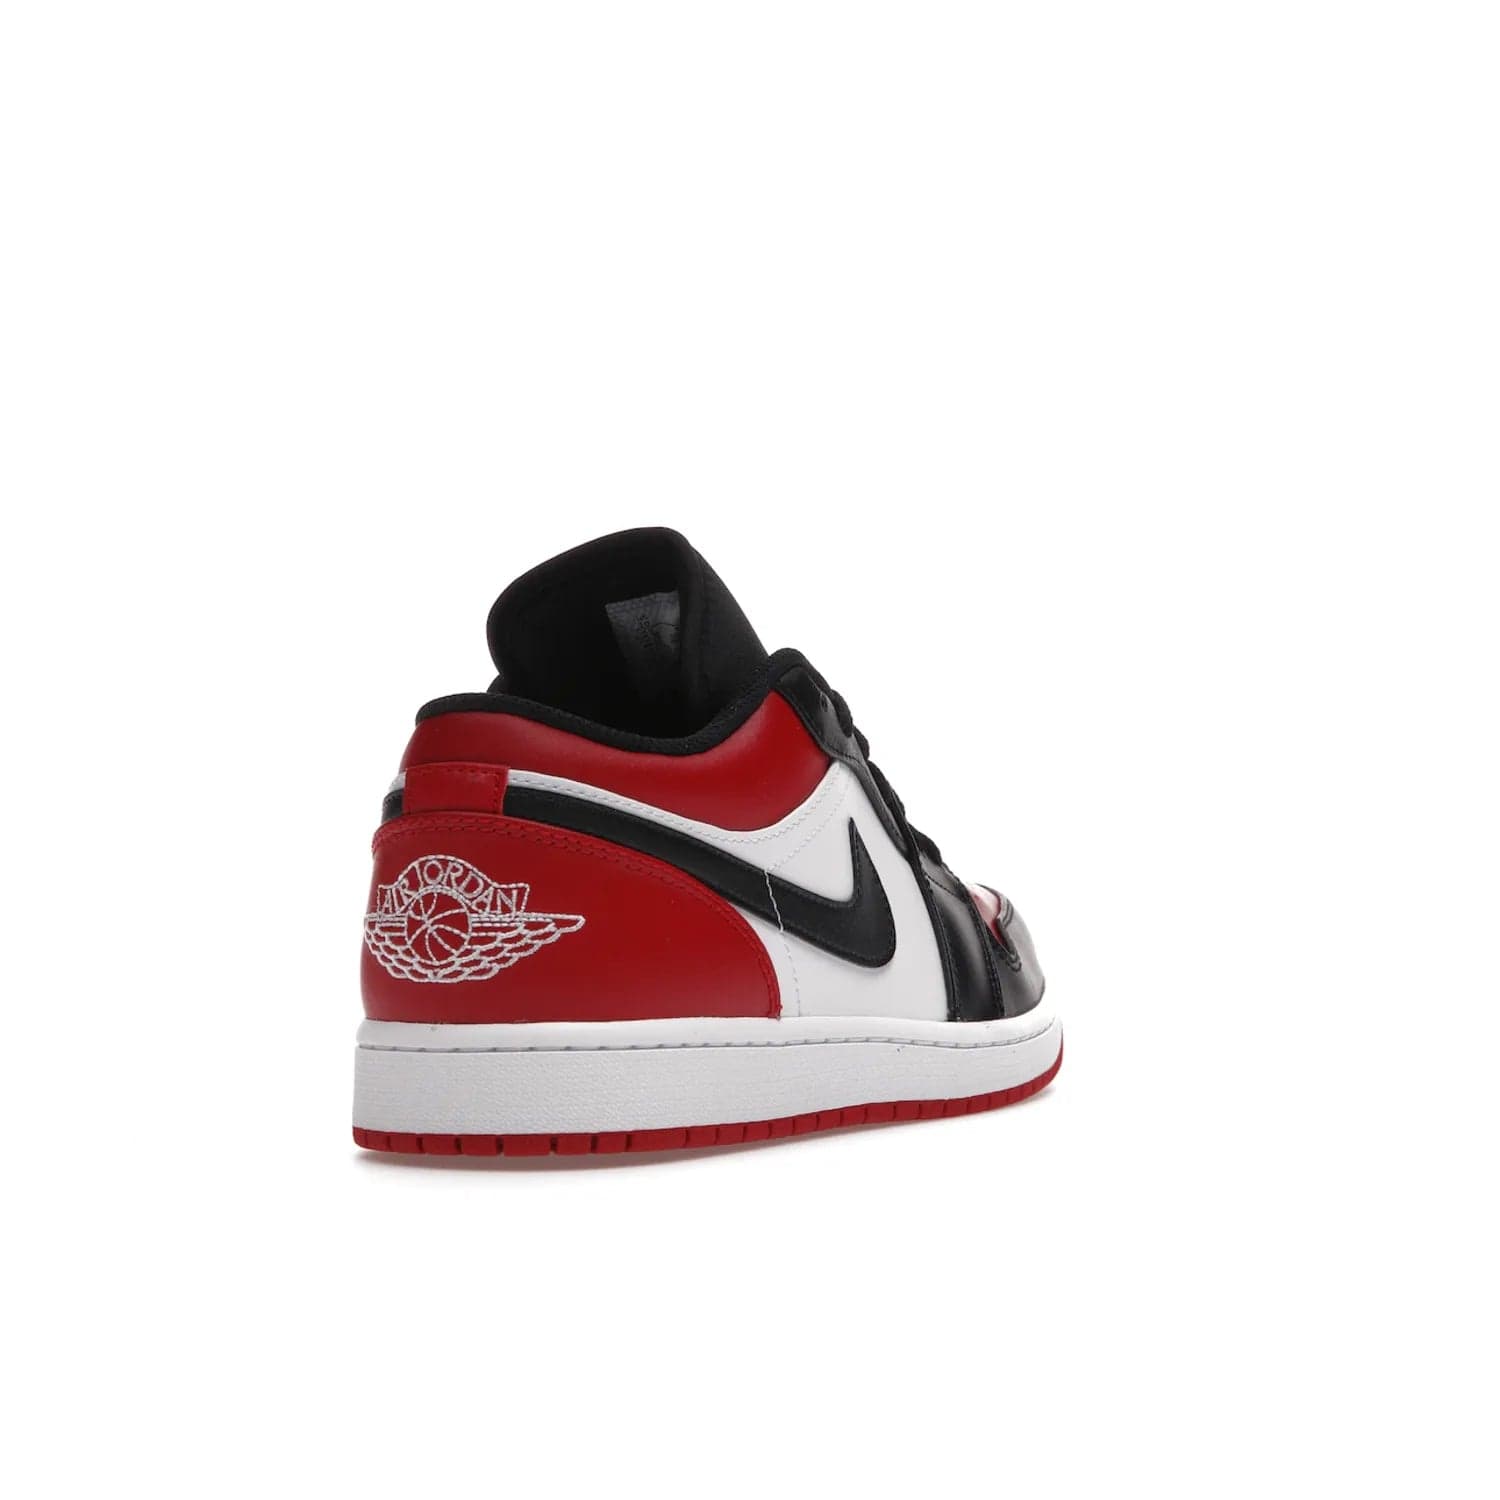 Jordan 1 Low Bred Toe - Image 31 - Only at www.BallersClubKickz.com - Step into the iconic Jordan 1 Retro. Mixing and matching of leather in red, black, and white makes for a unique colorway. Finished off with a Wing logo embroidery & Jumpman label. Comfortable and stylish at an affordable $100, the Jordan 1 Low Bred Toe is perfect for any true sneaker fan.